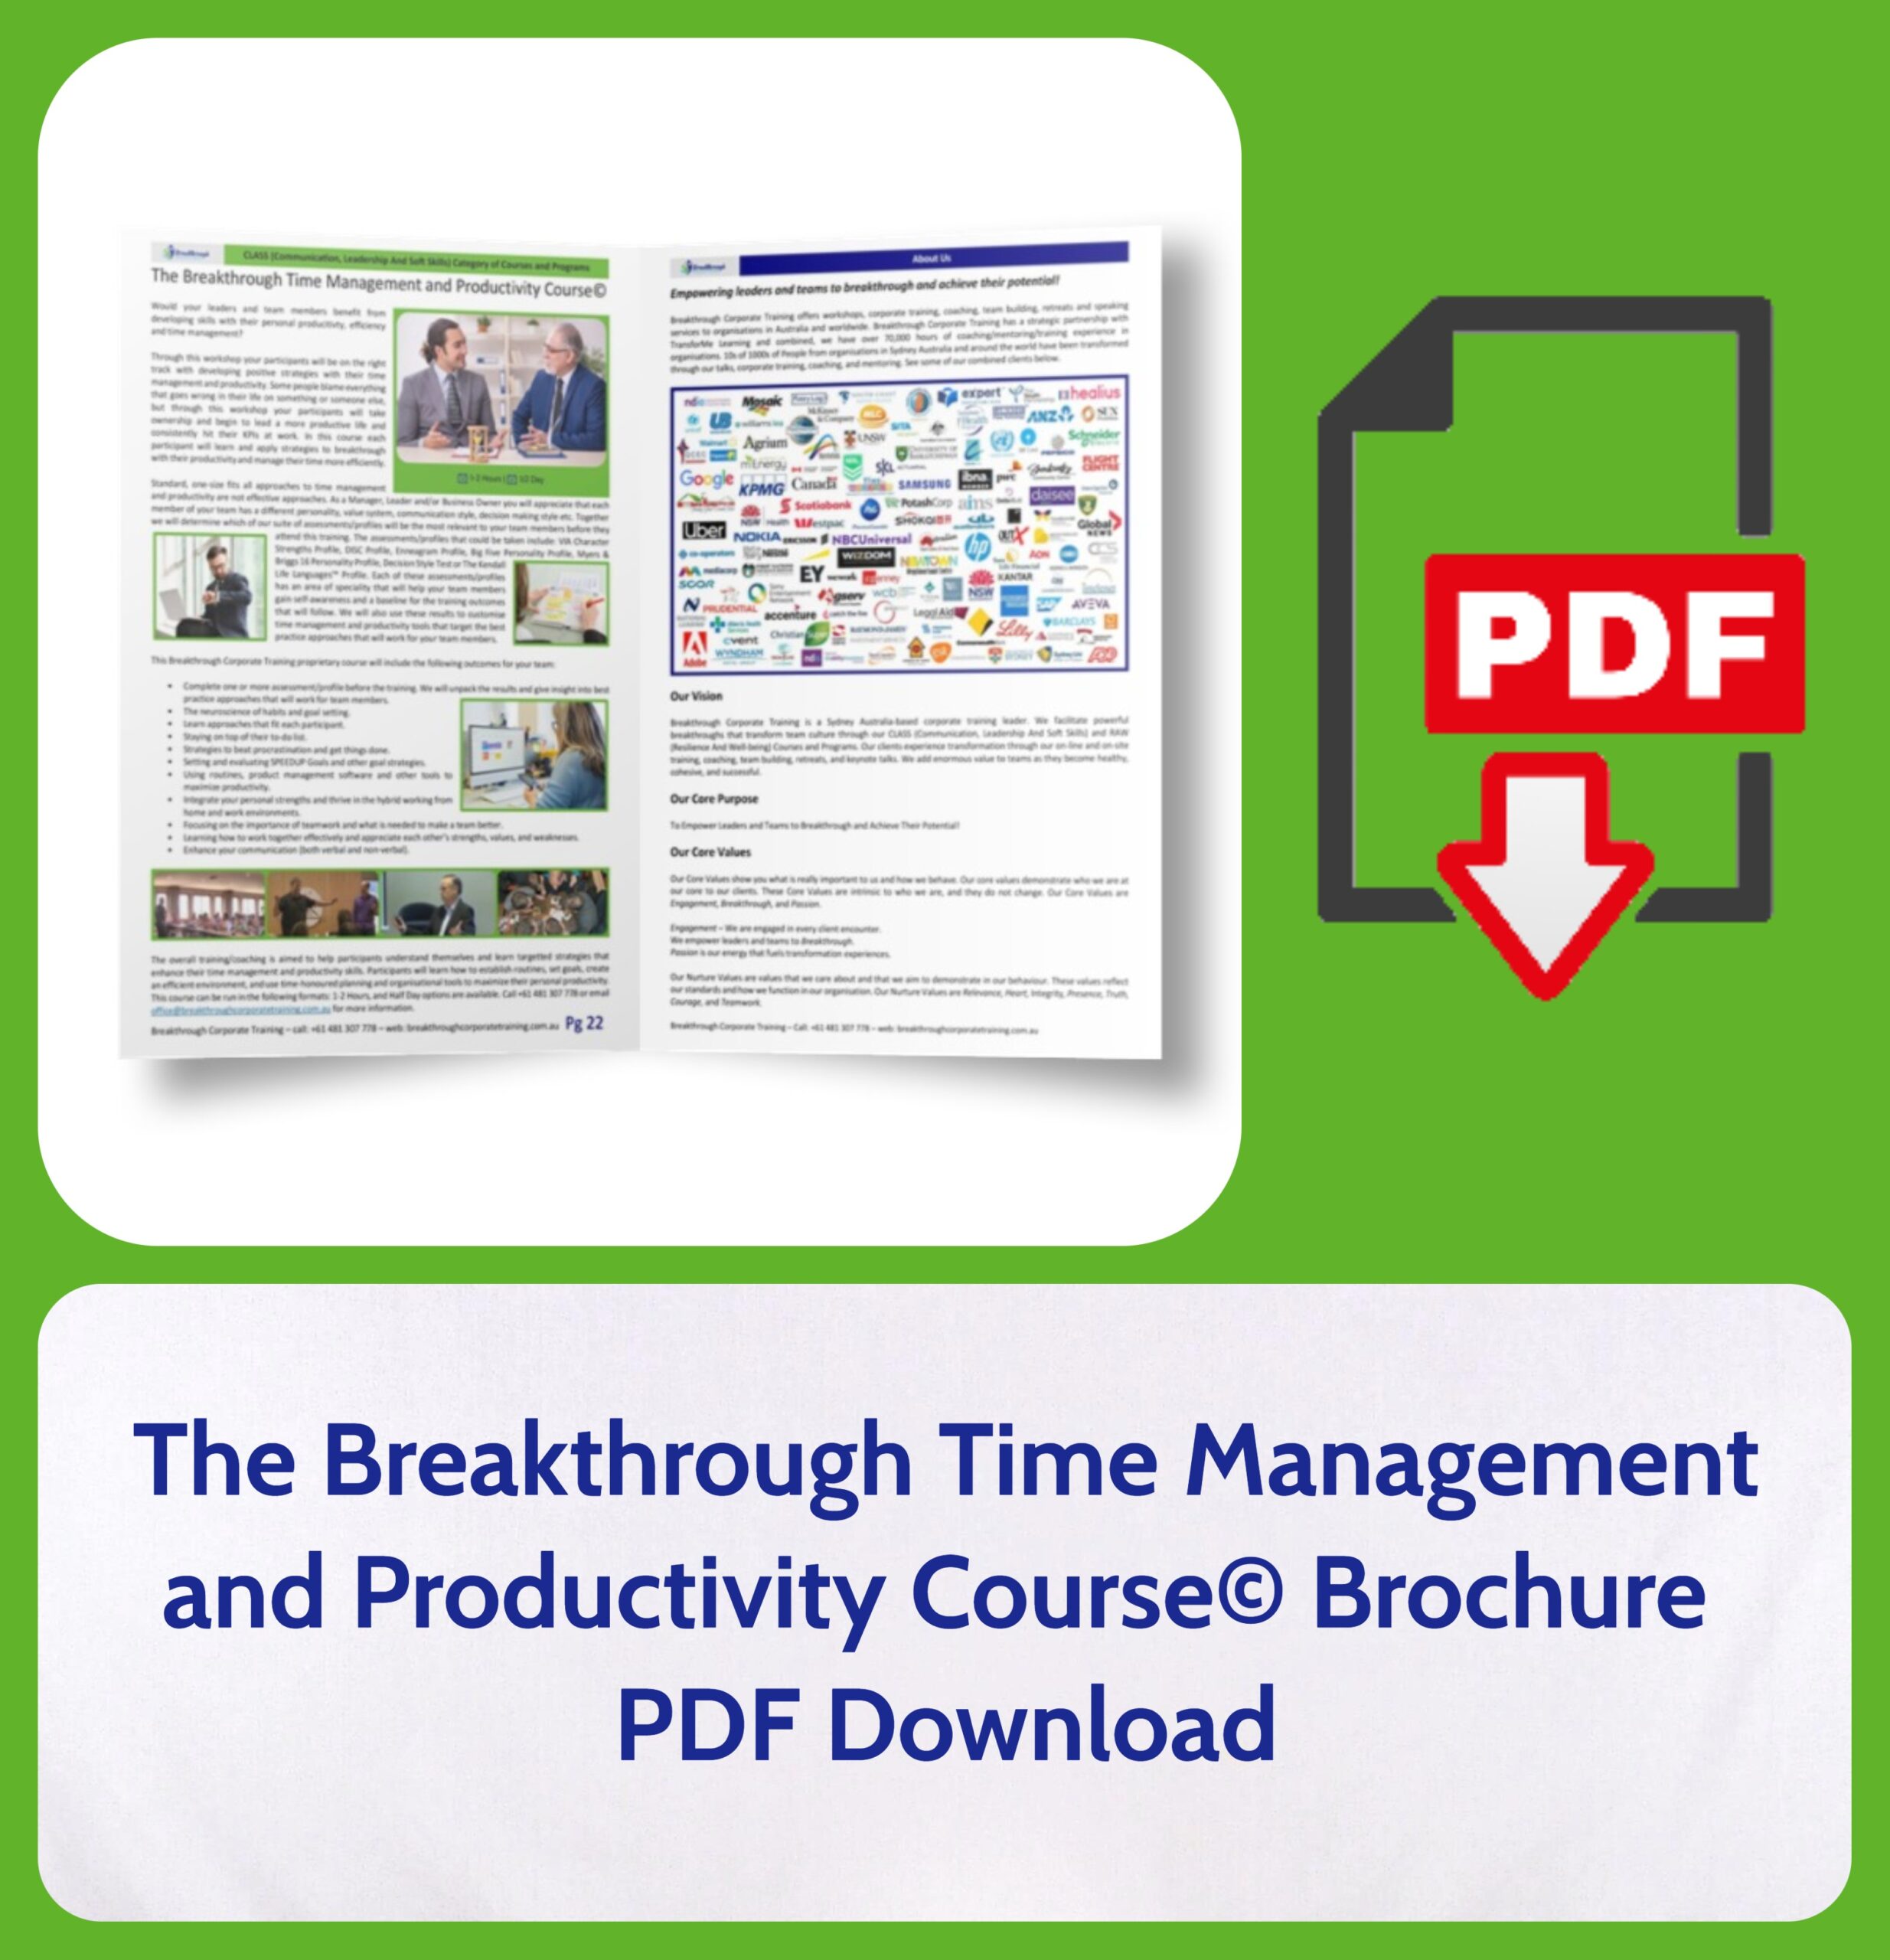 The Breakthrough Time Management